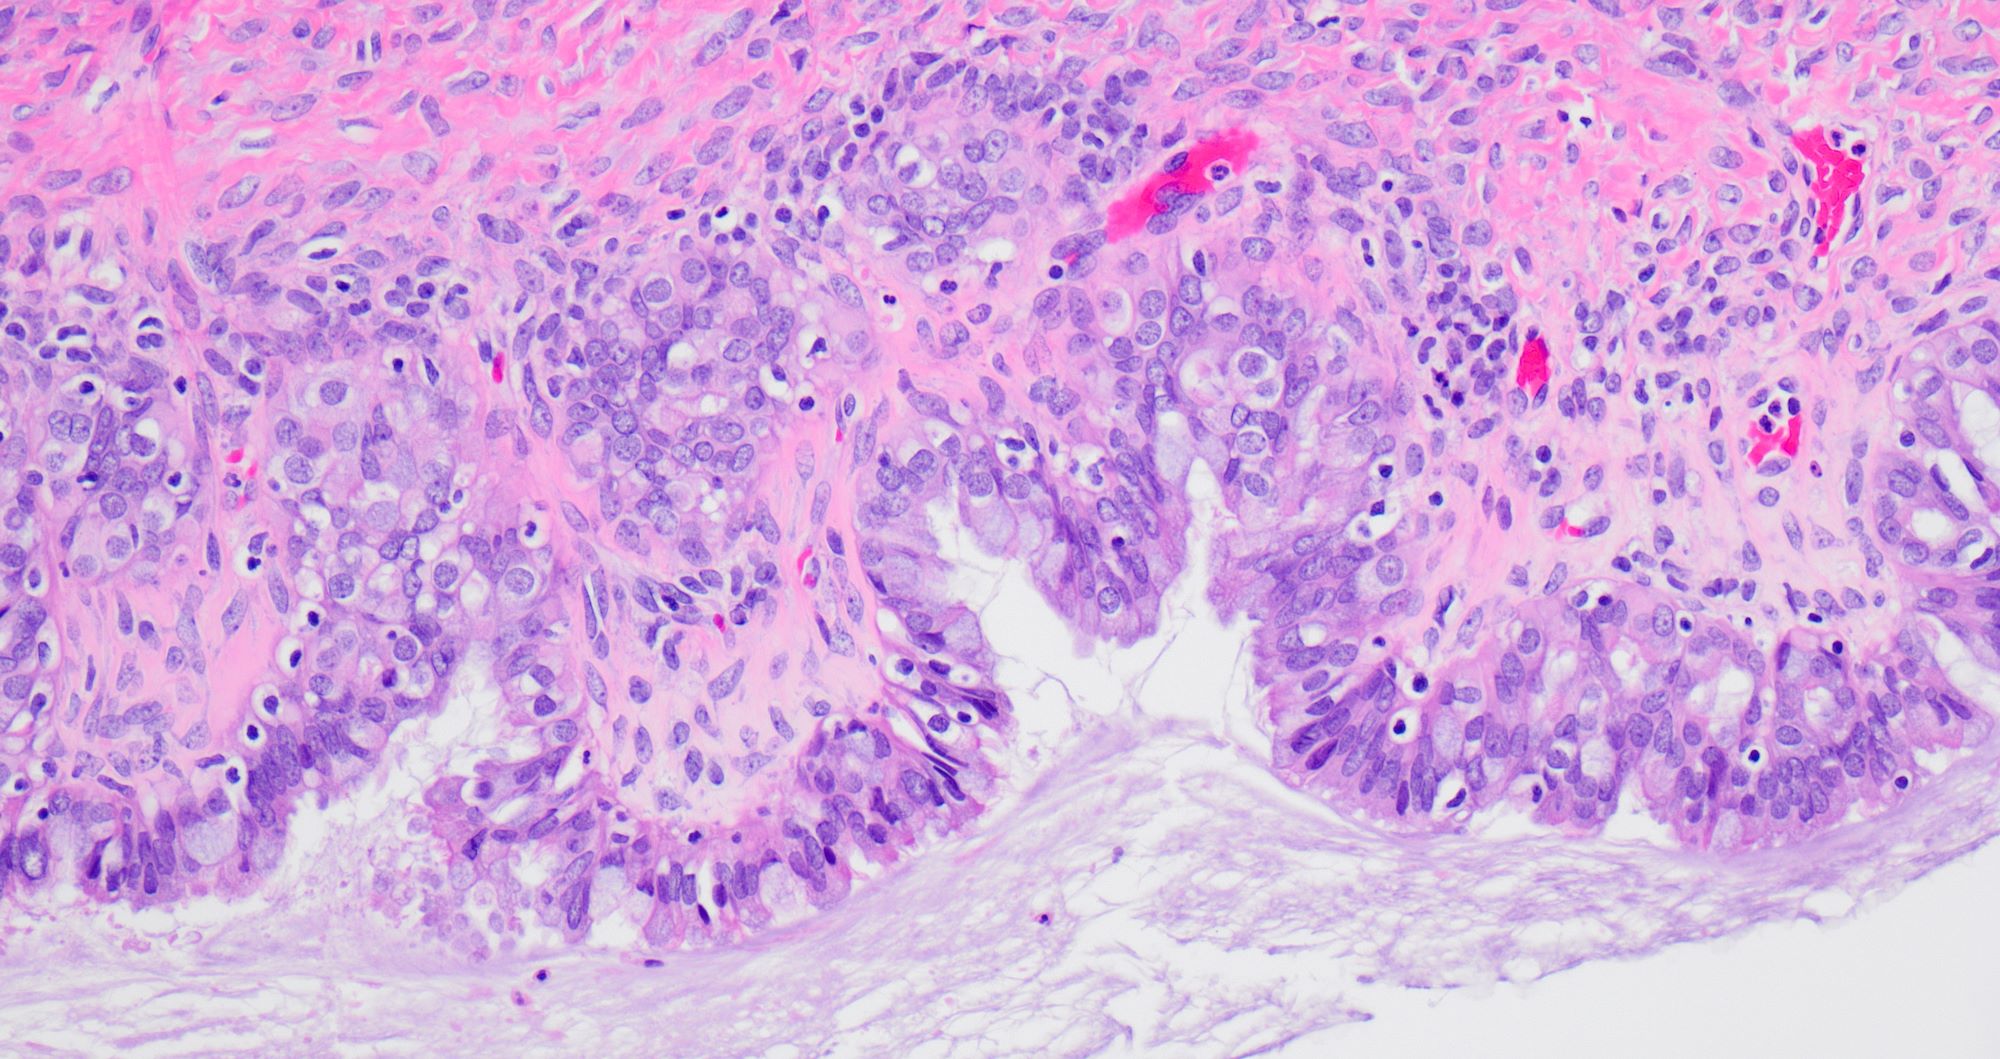 High power view of the cyst wall lined by simple epithelium consisting of serous type ciliated cells admixed with endocervical type mucinous cells